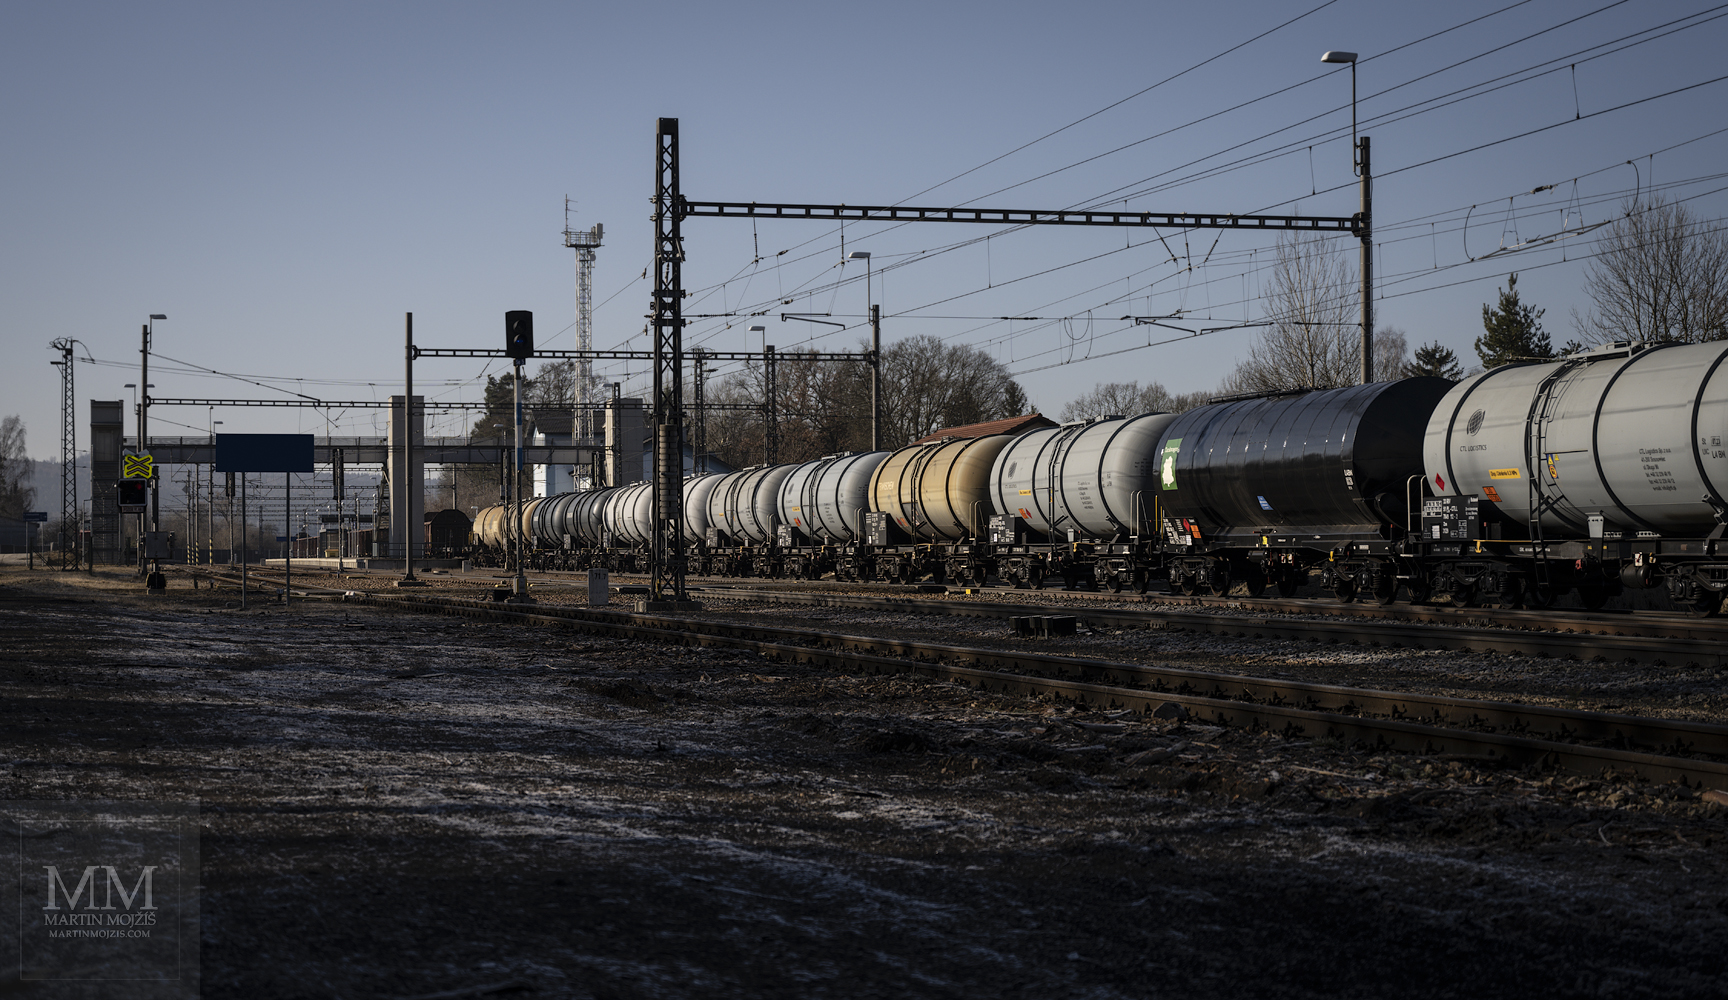 Tank cars in a freight train.